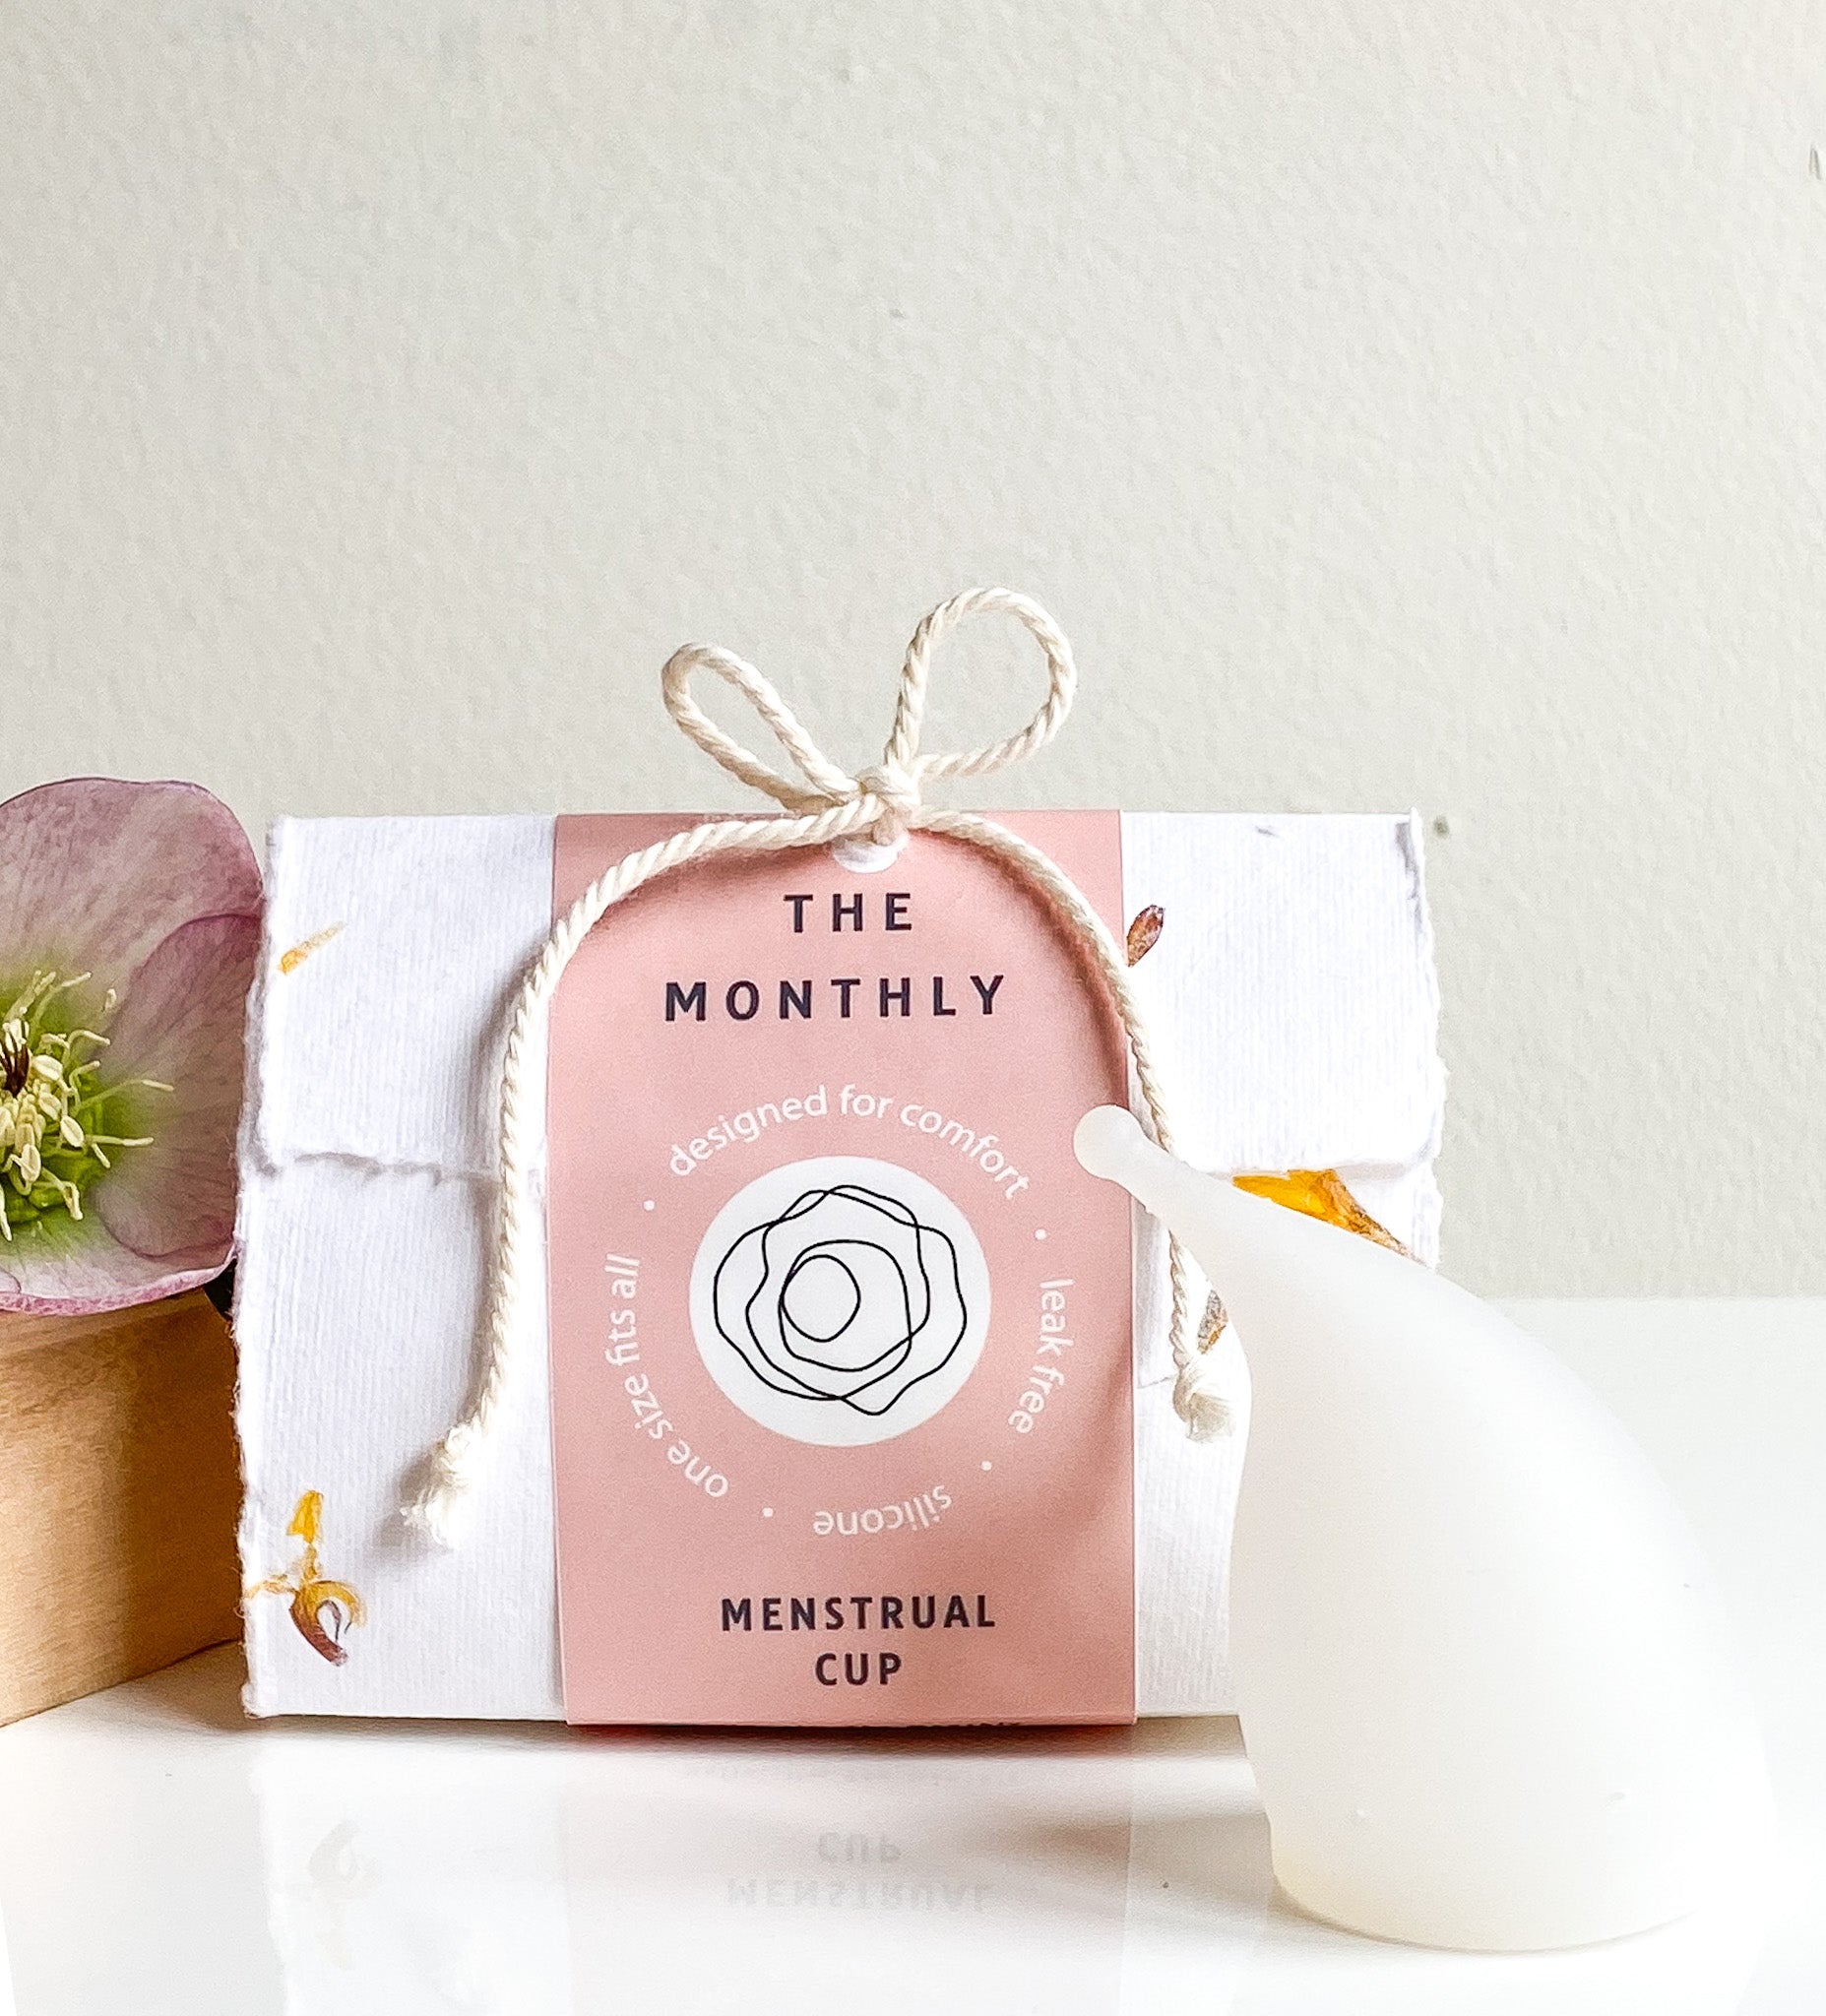 The Monthly Menstrual Cup